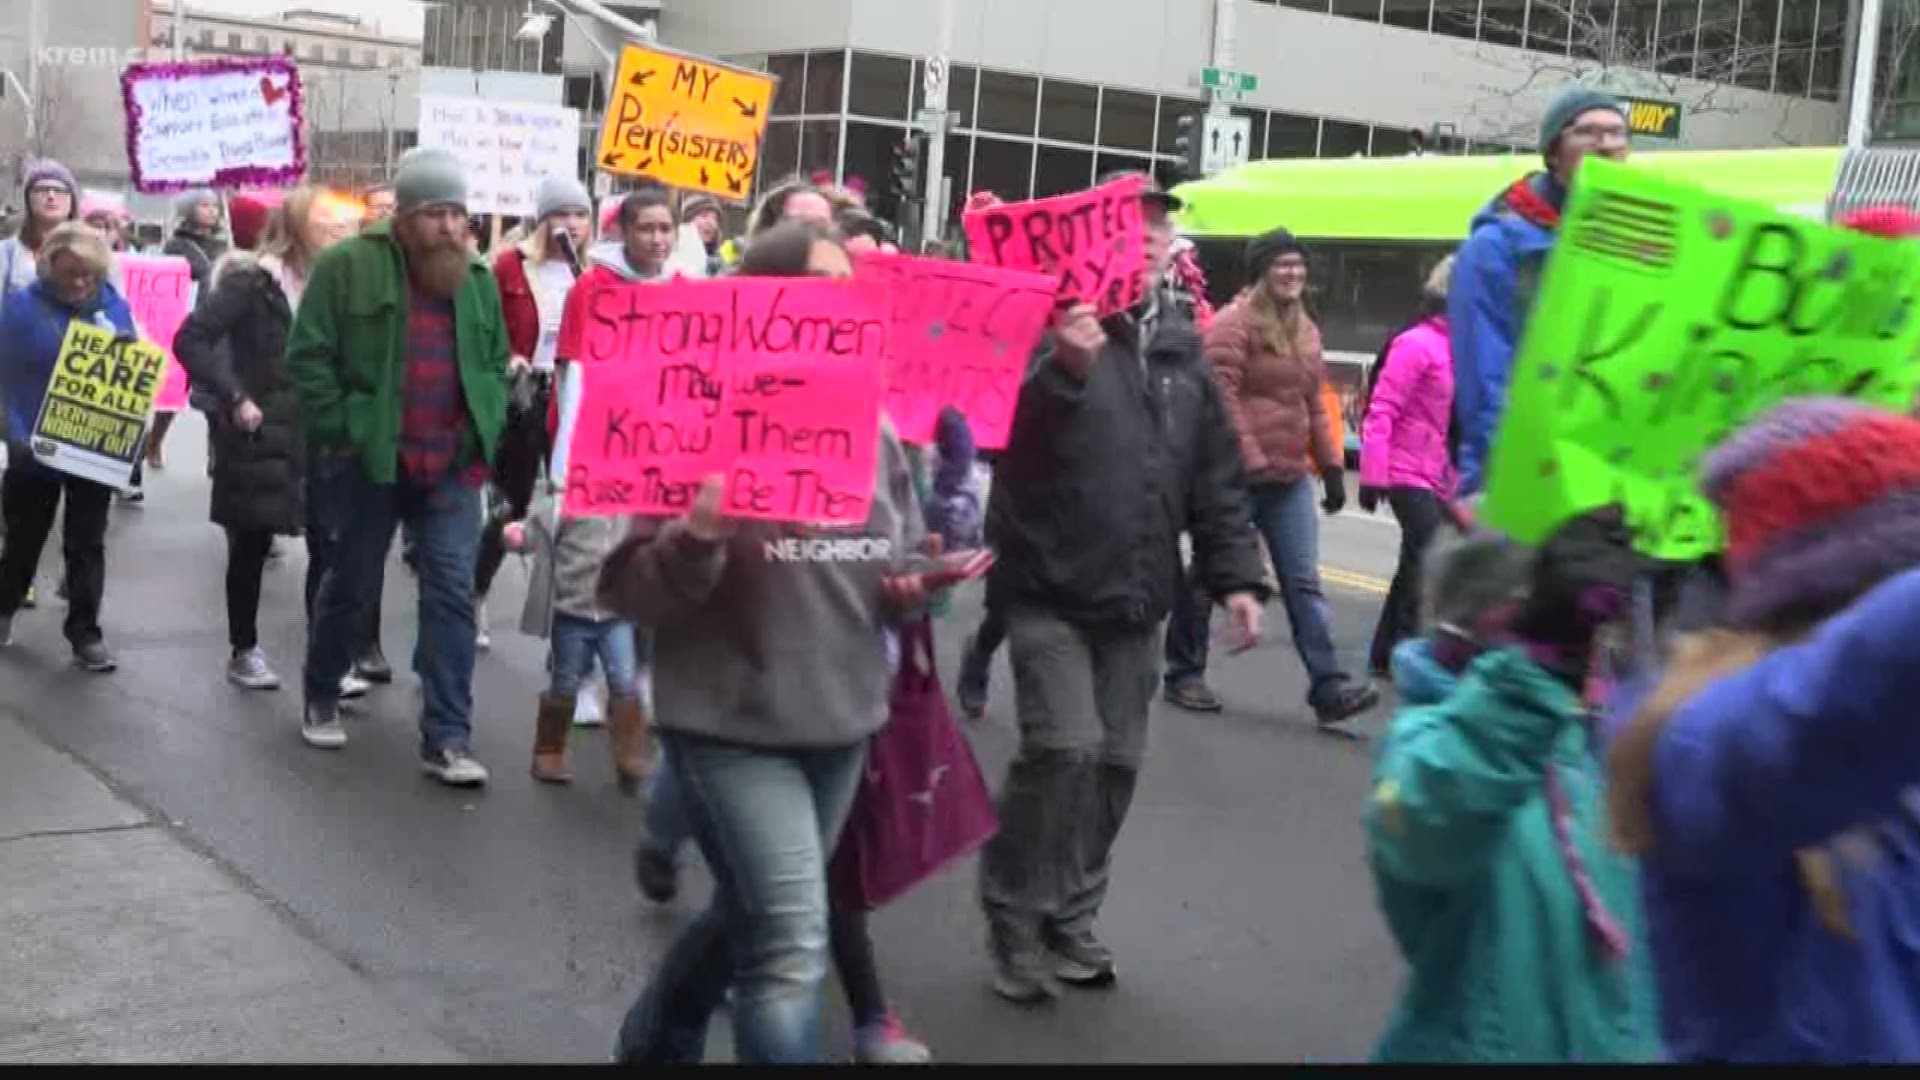 KREM 2 Reporter Casey Decker gives us the scoop on MLK, Women's and Indigenous Peoples' marches that occurred over the weekend.